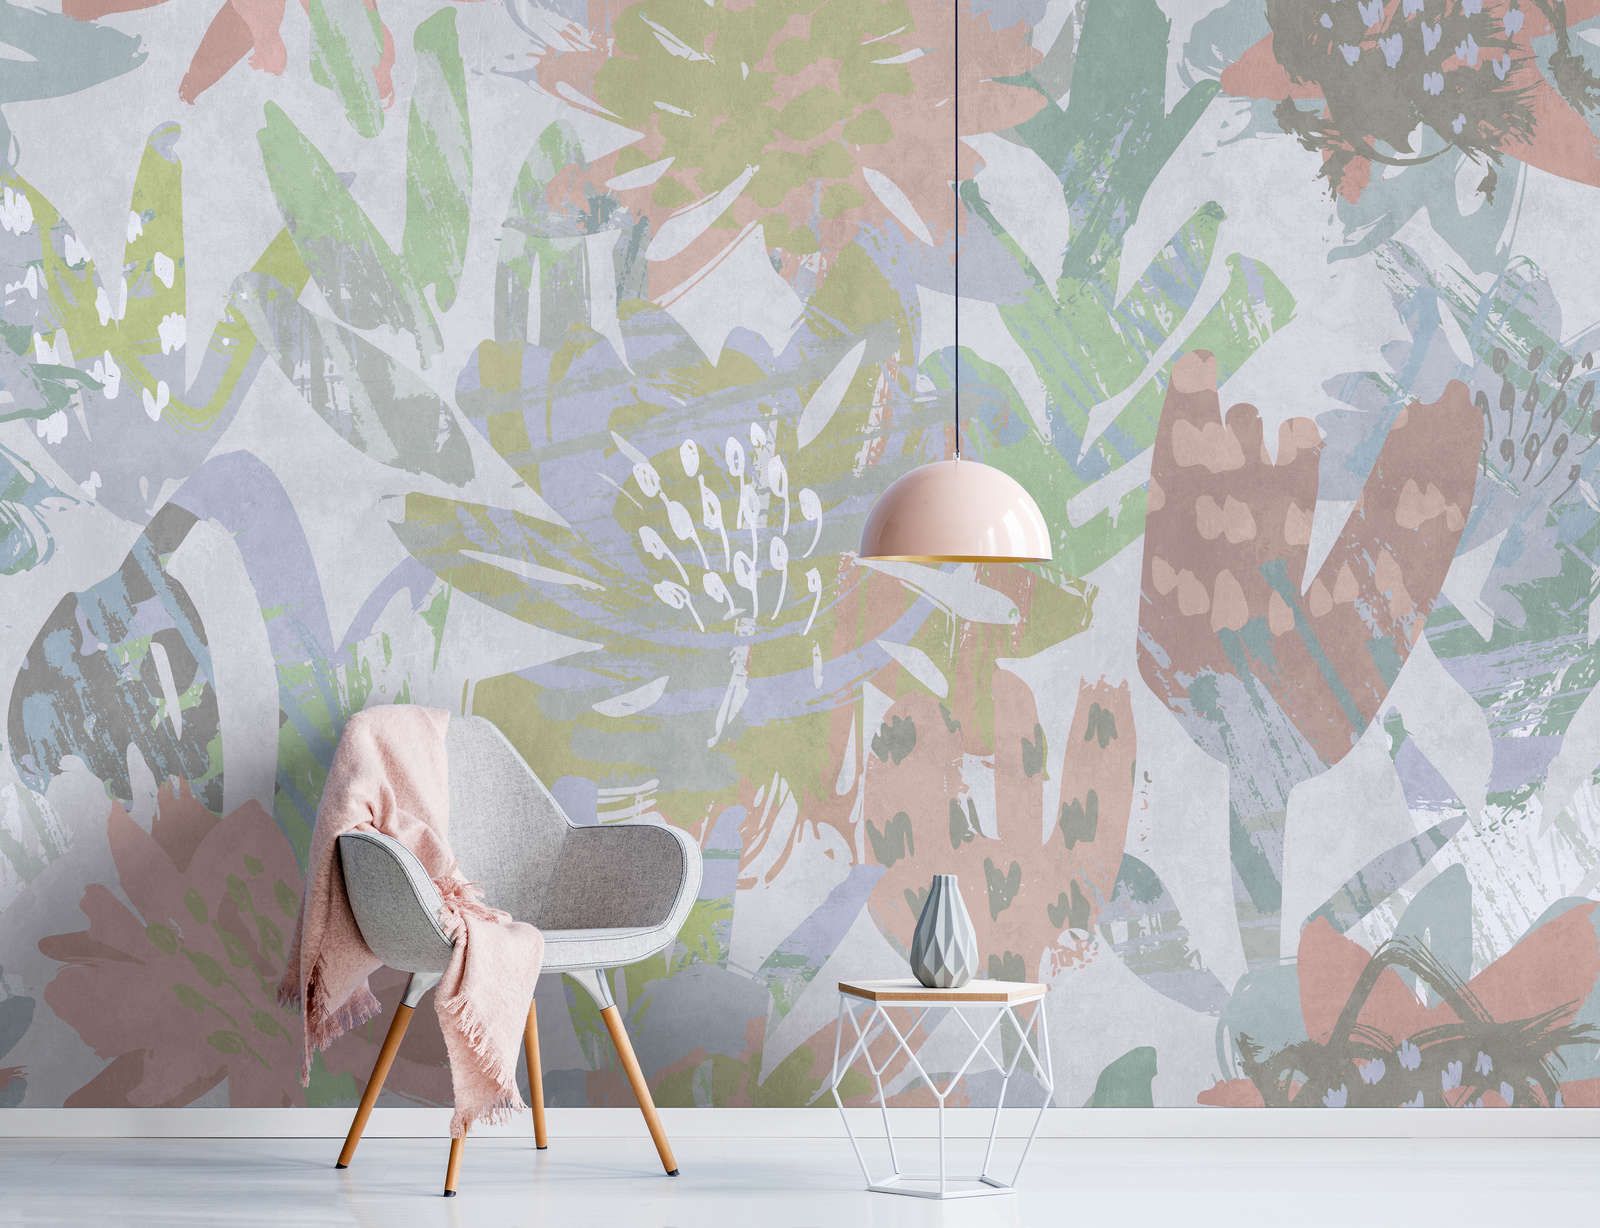             Photo wallpaper »sophia« - Colourful floral pattern on concrete plaster texture - Smooth, slightly pearlescent non-woven fabric
        